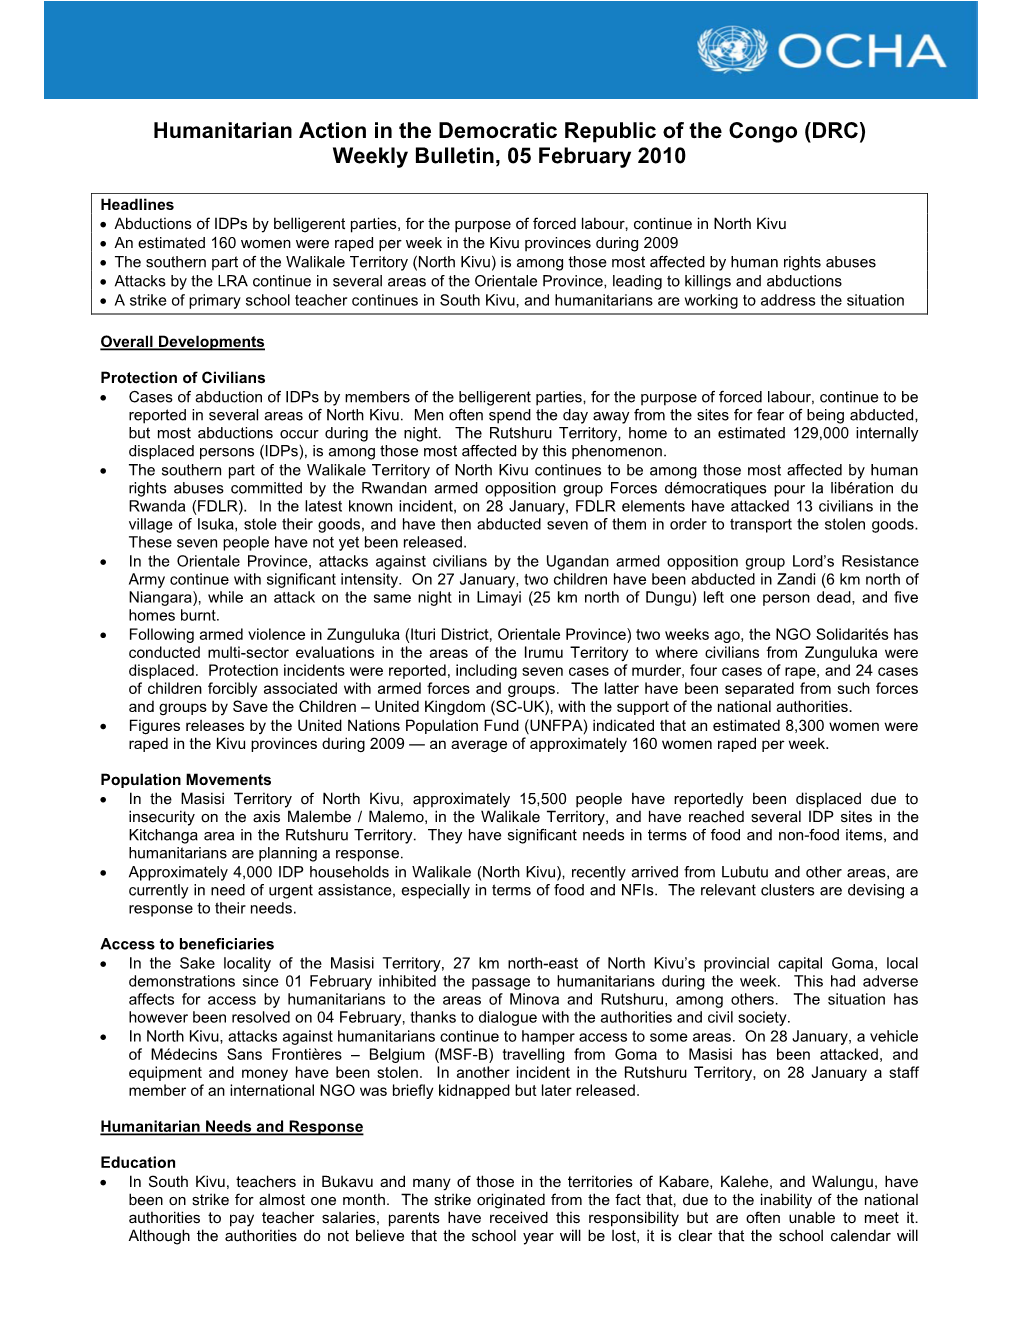 Humanitarian Action in the Democratic Republic of the Congo (DRC) Weekly Bulletin, 05 February 2010